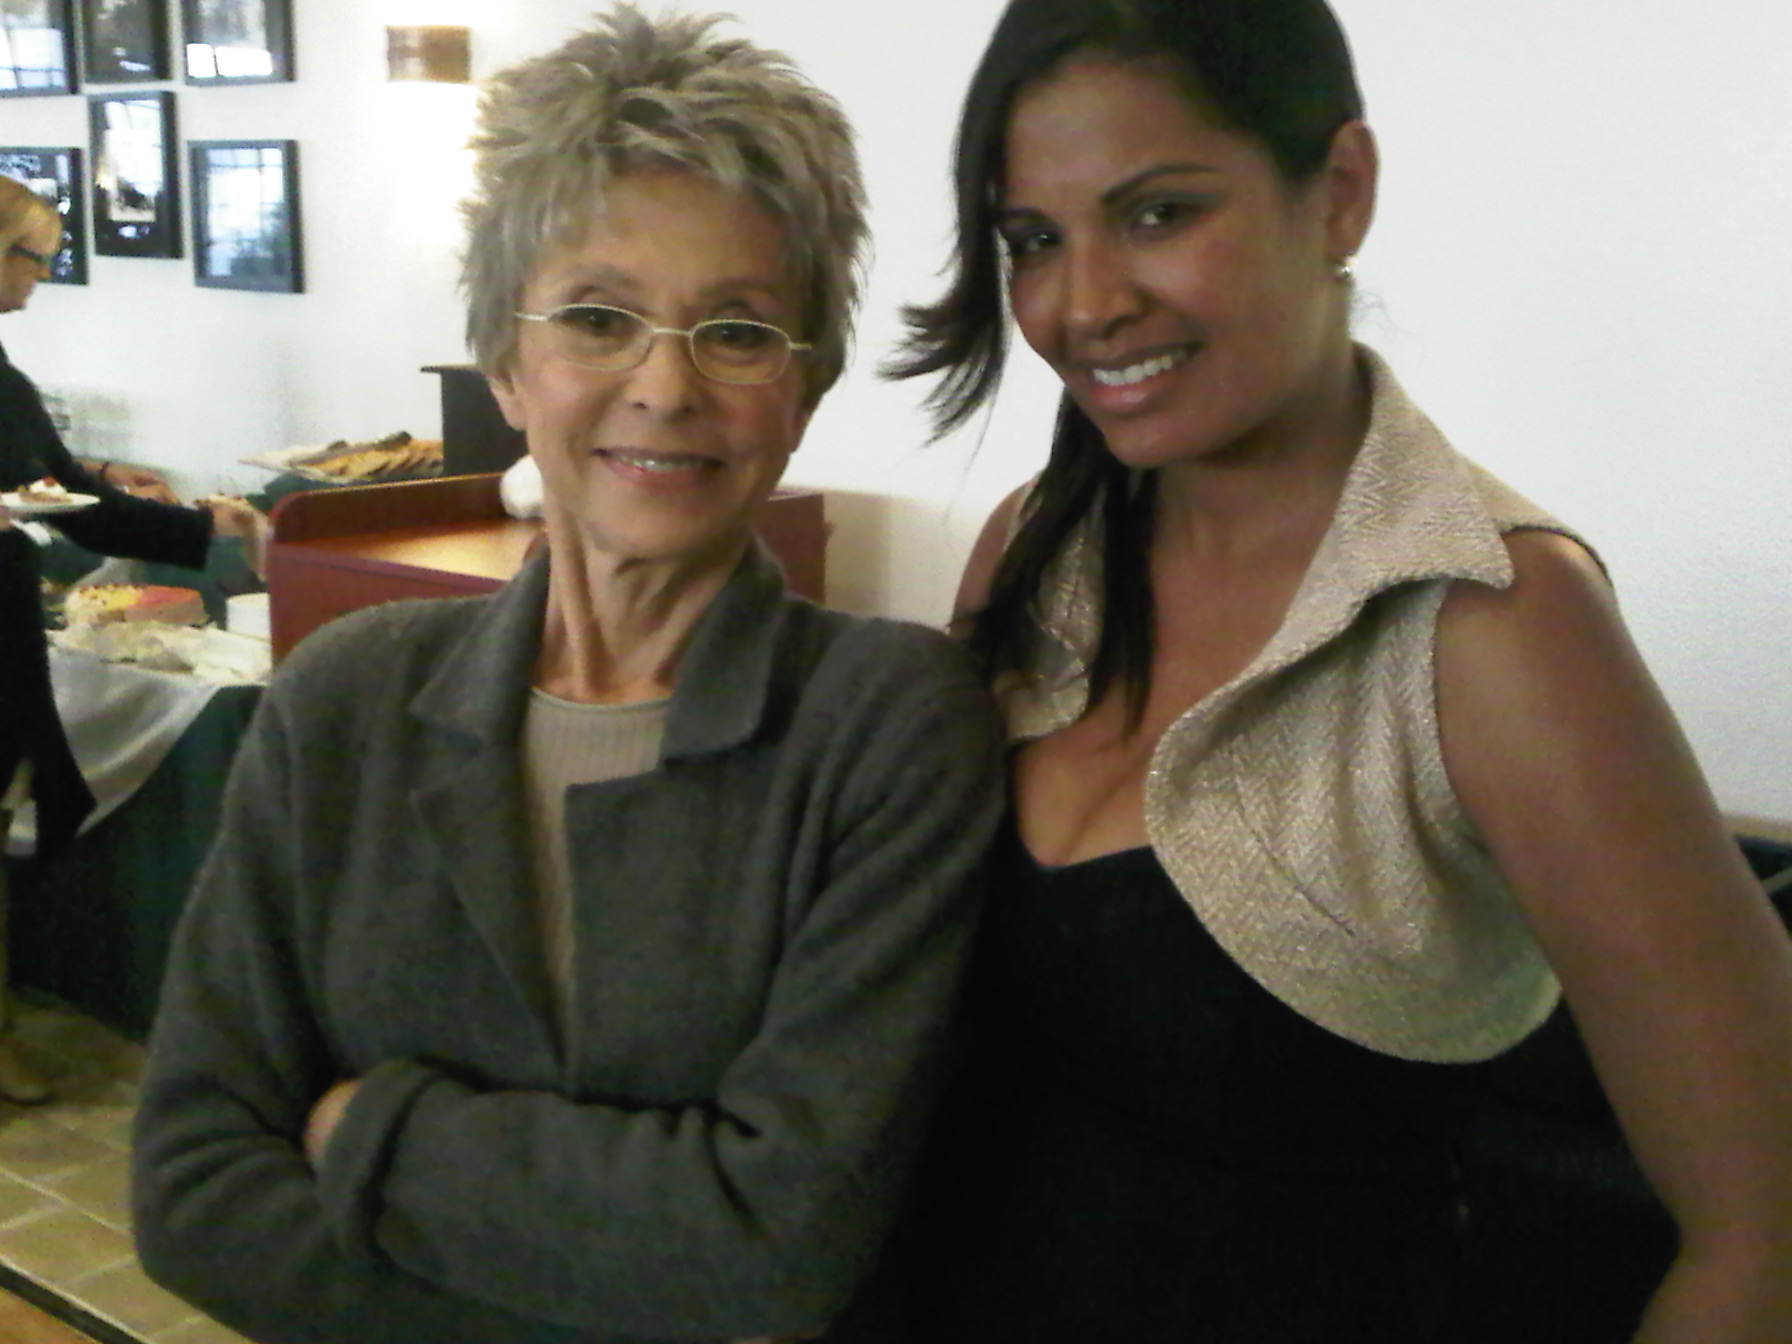 With West Side Story Oscar Winner, RITA MORENO, our Puerto Rican pride.